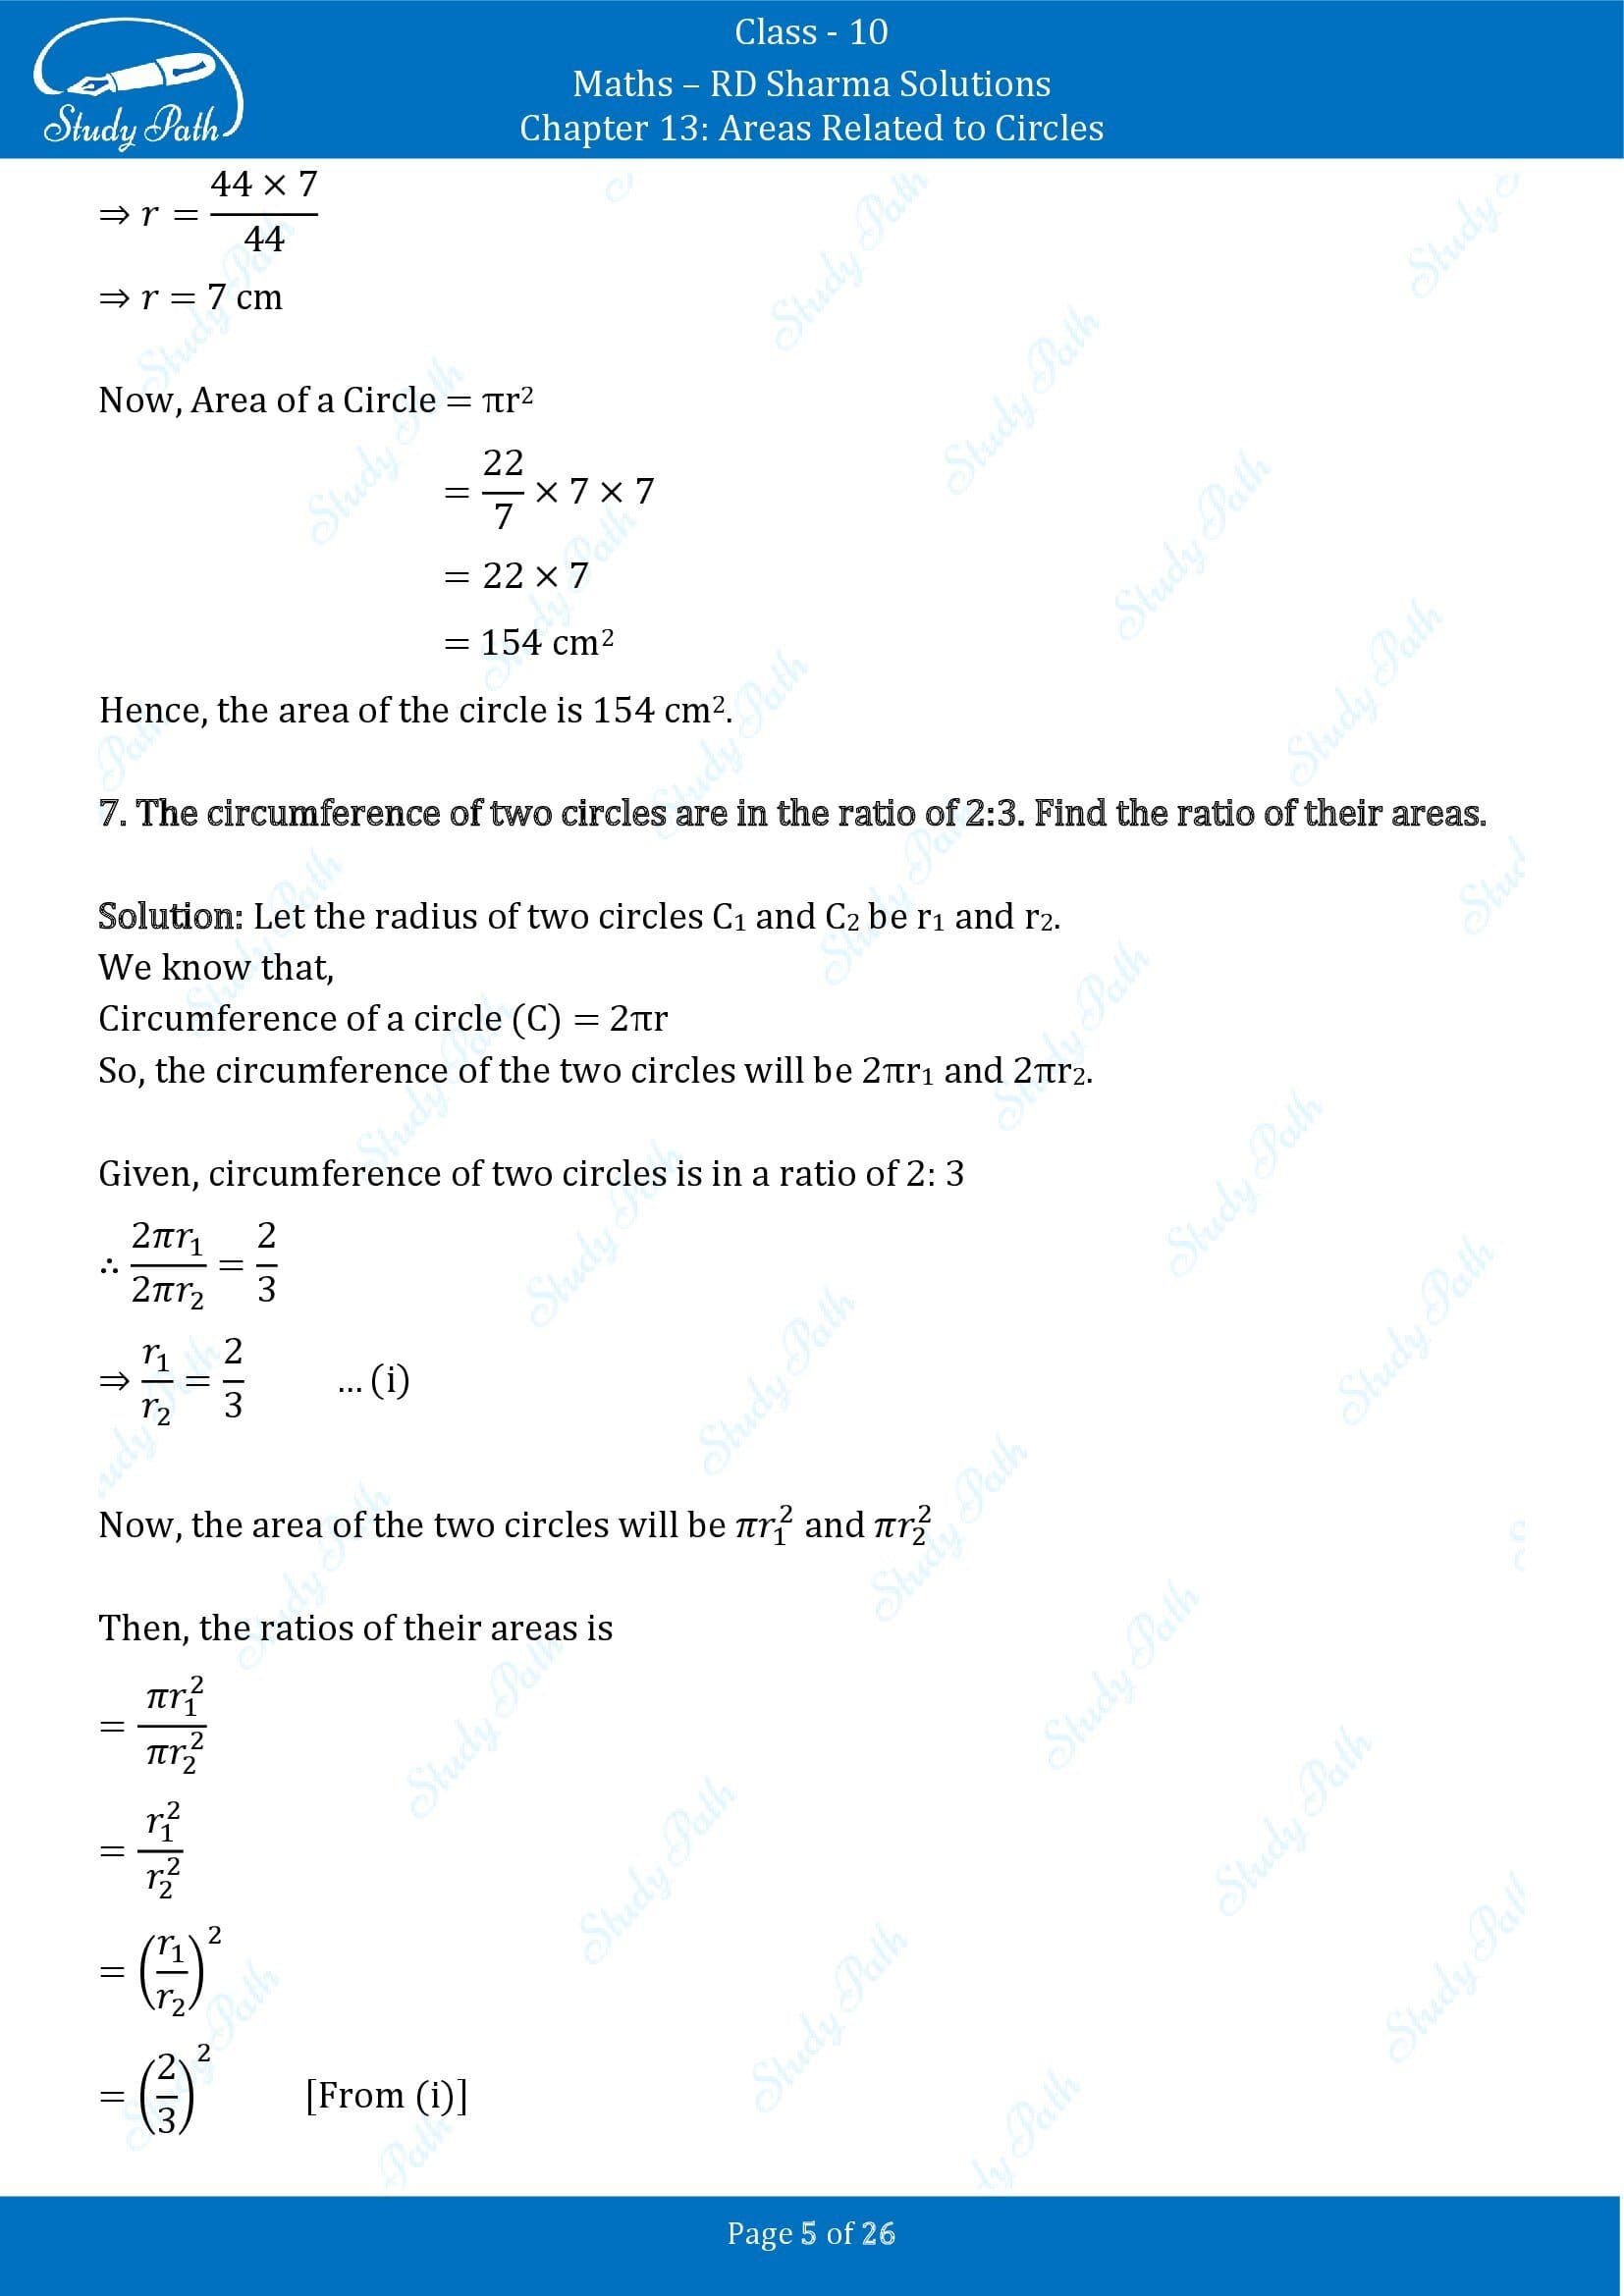 RD Sharma Solutions Class 10 Chapter 13 Areas Related to Circles Exercise 13.1 00005